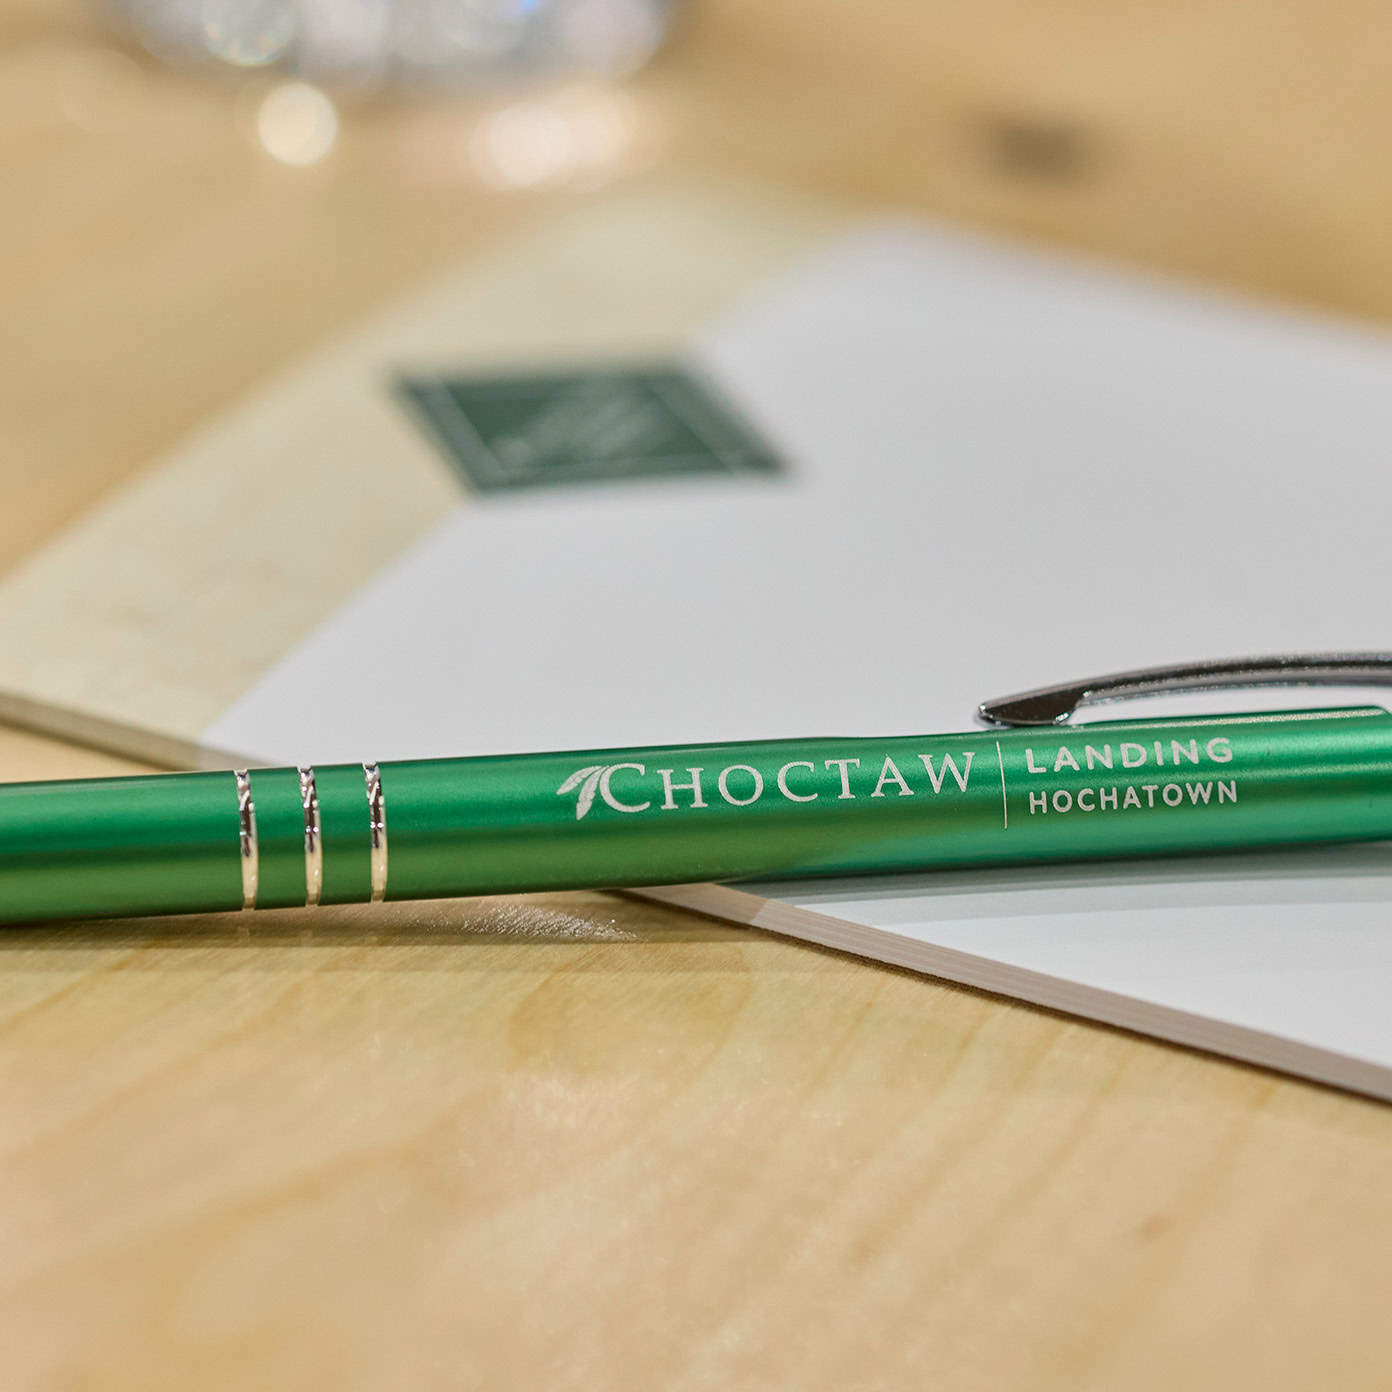 A green ballpoint pen with the "Choctaw Landing Hochatown" logo rests on a notepad on a wood table top.